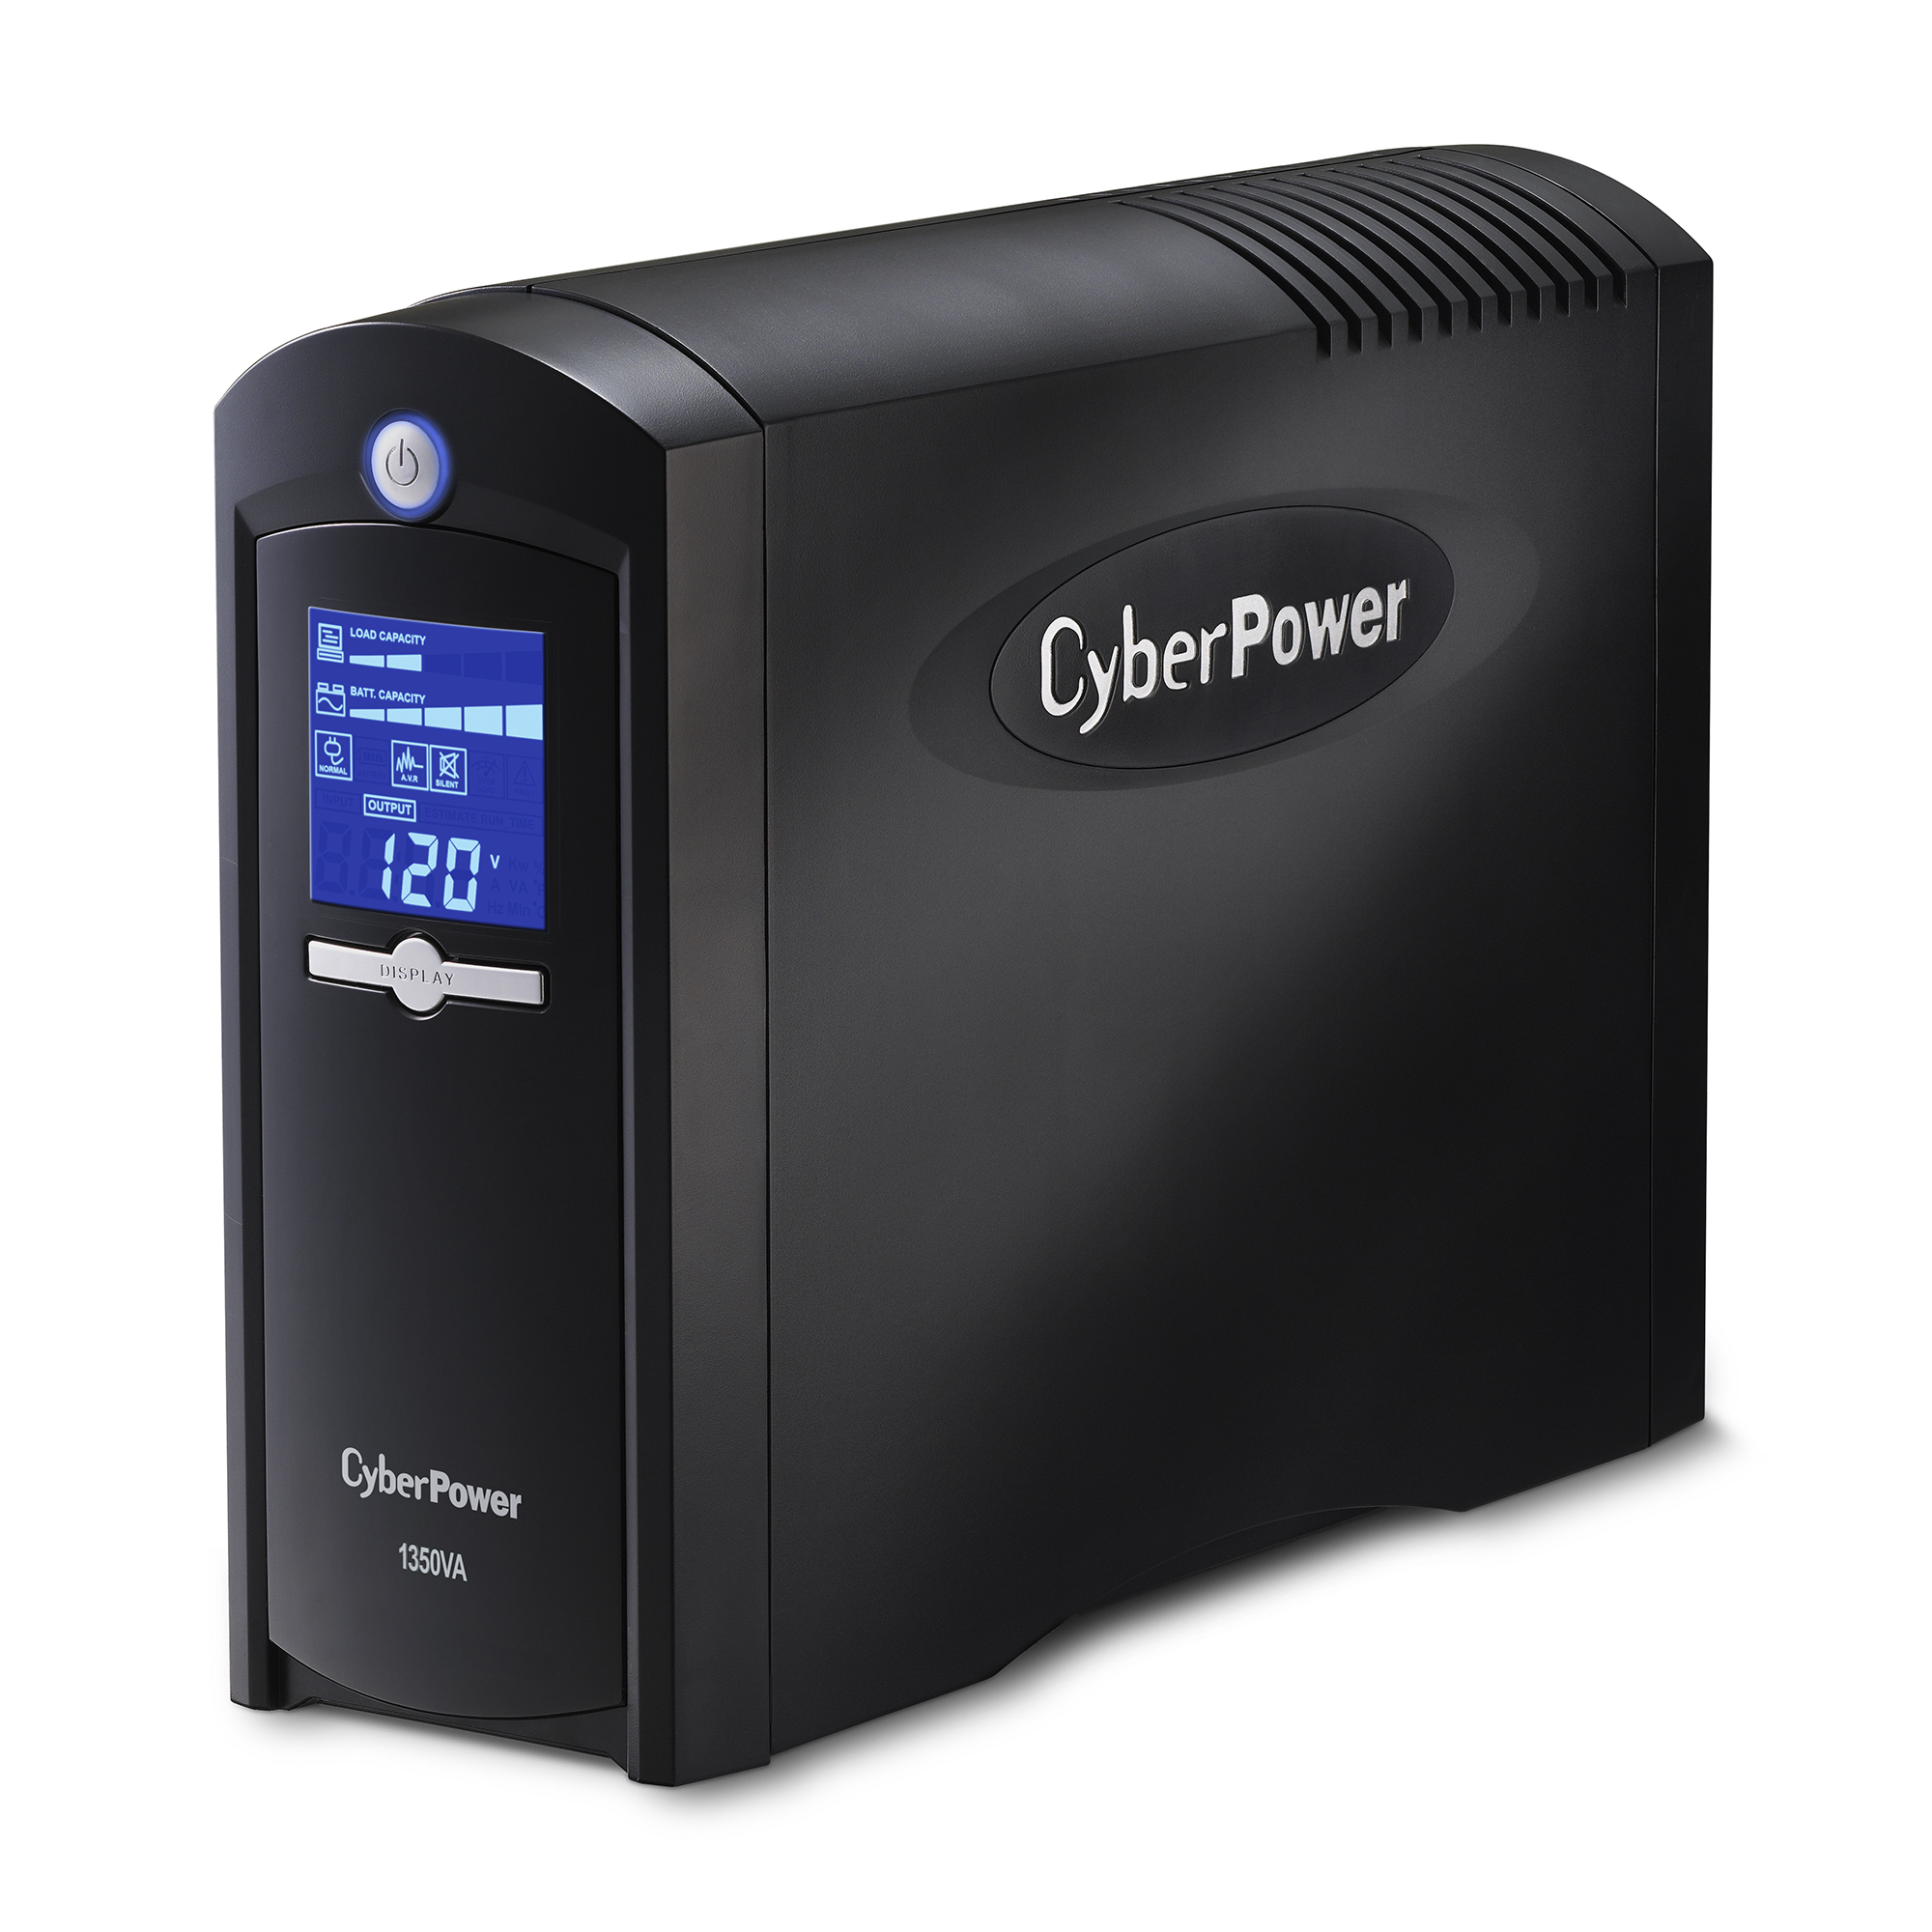 cyberpower powerpanel personal edition 1.4.3